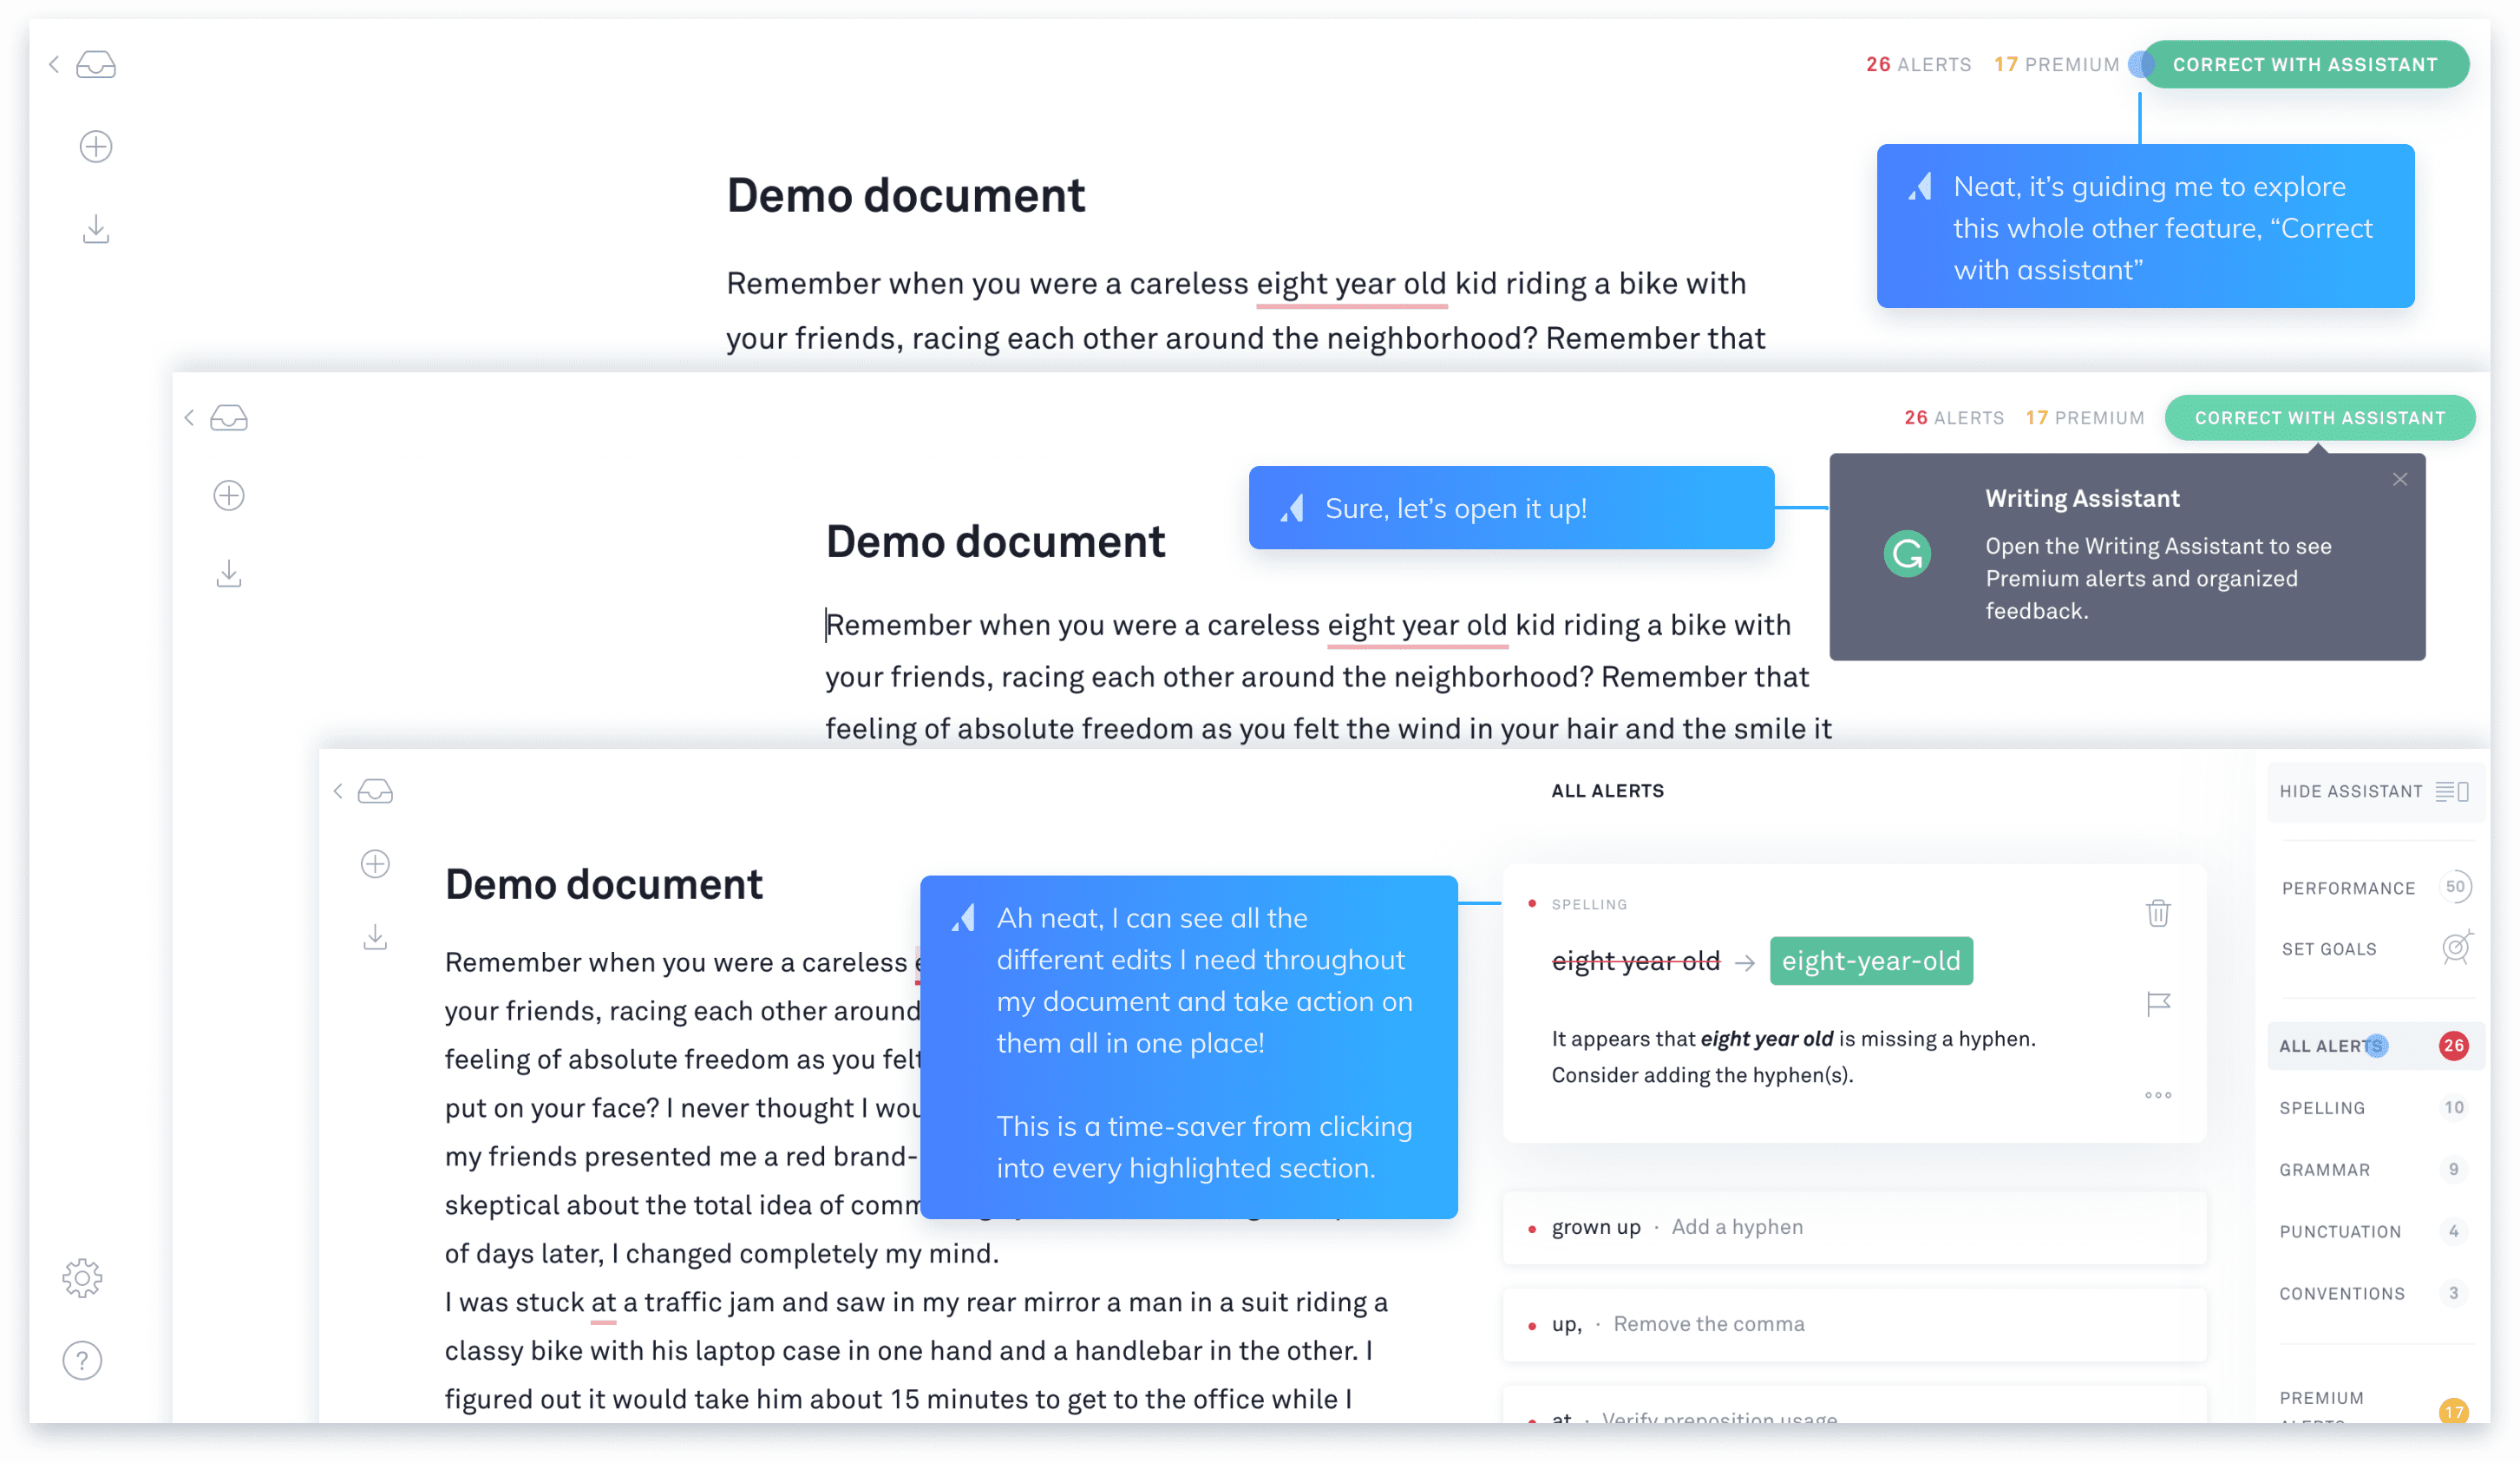 grammarly-onboarding-example-learning-by-doing